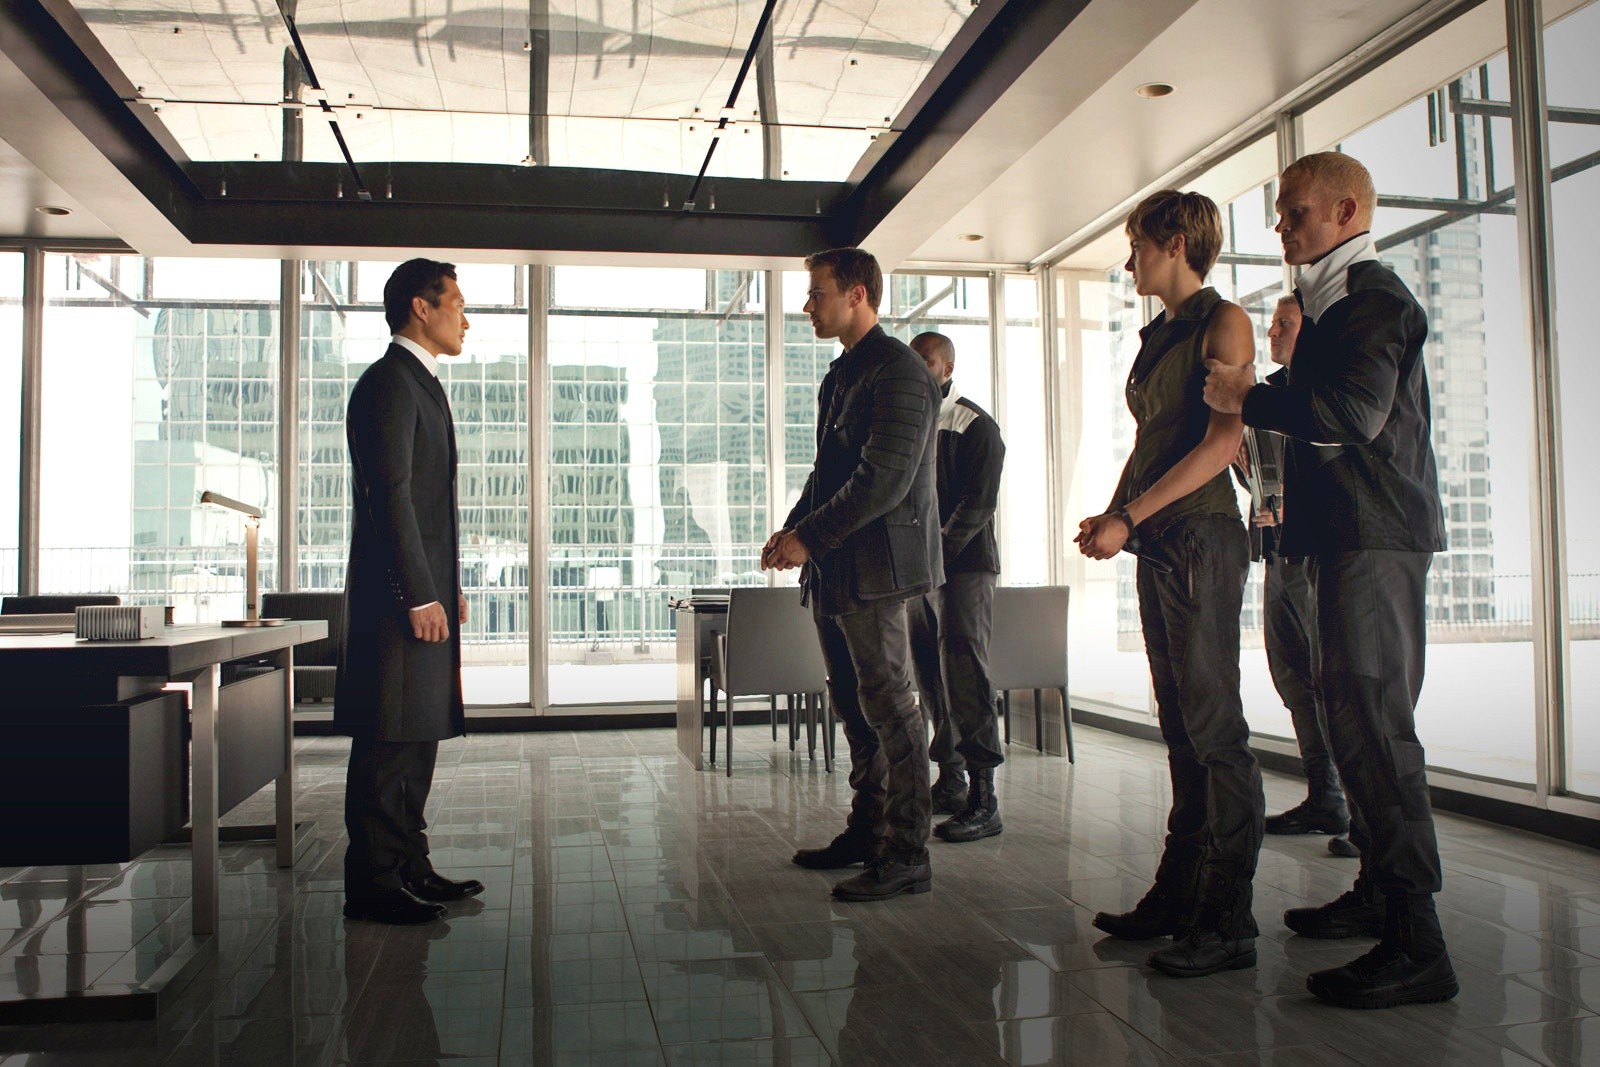 Daniel Dae Kim, Theo James and Shailene Woodley in Summit Entertainment's The Divergent Series: Insurgent (2015). Photo credit by Andrew Cooper.